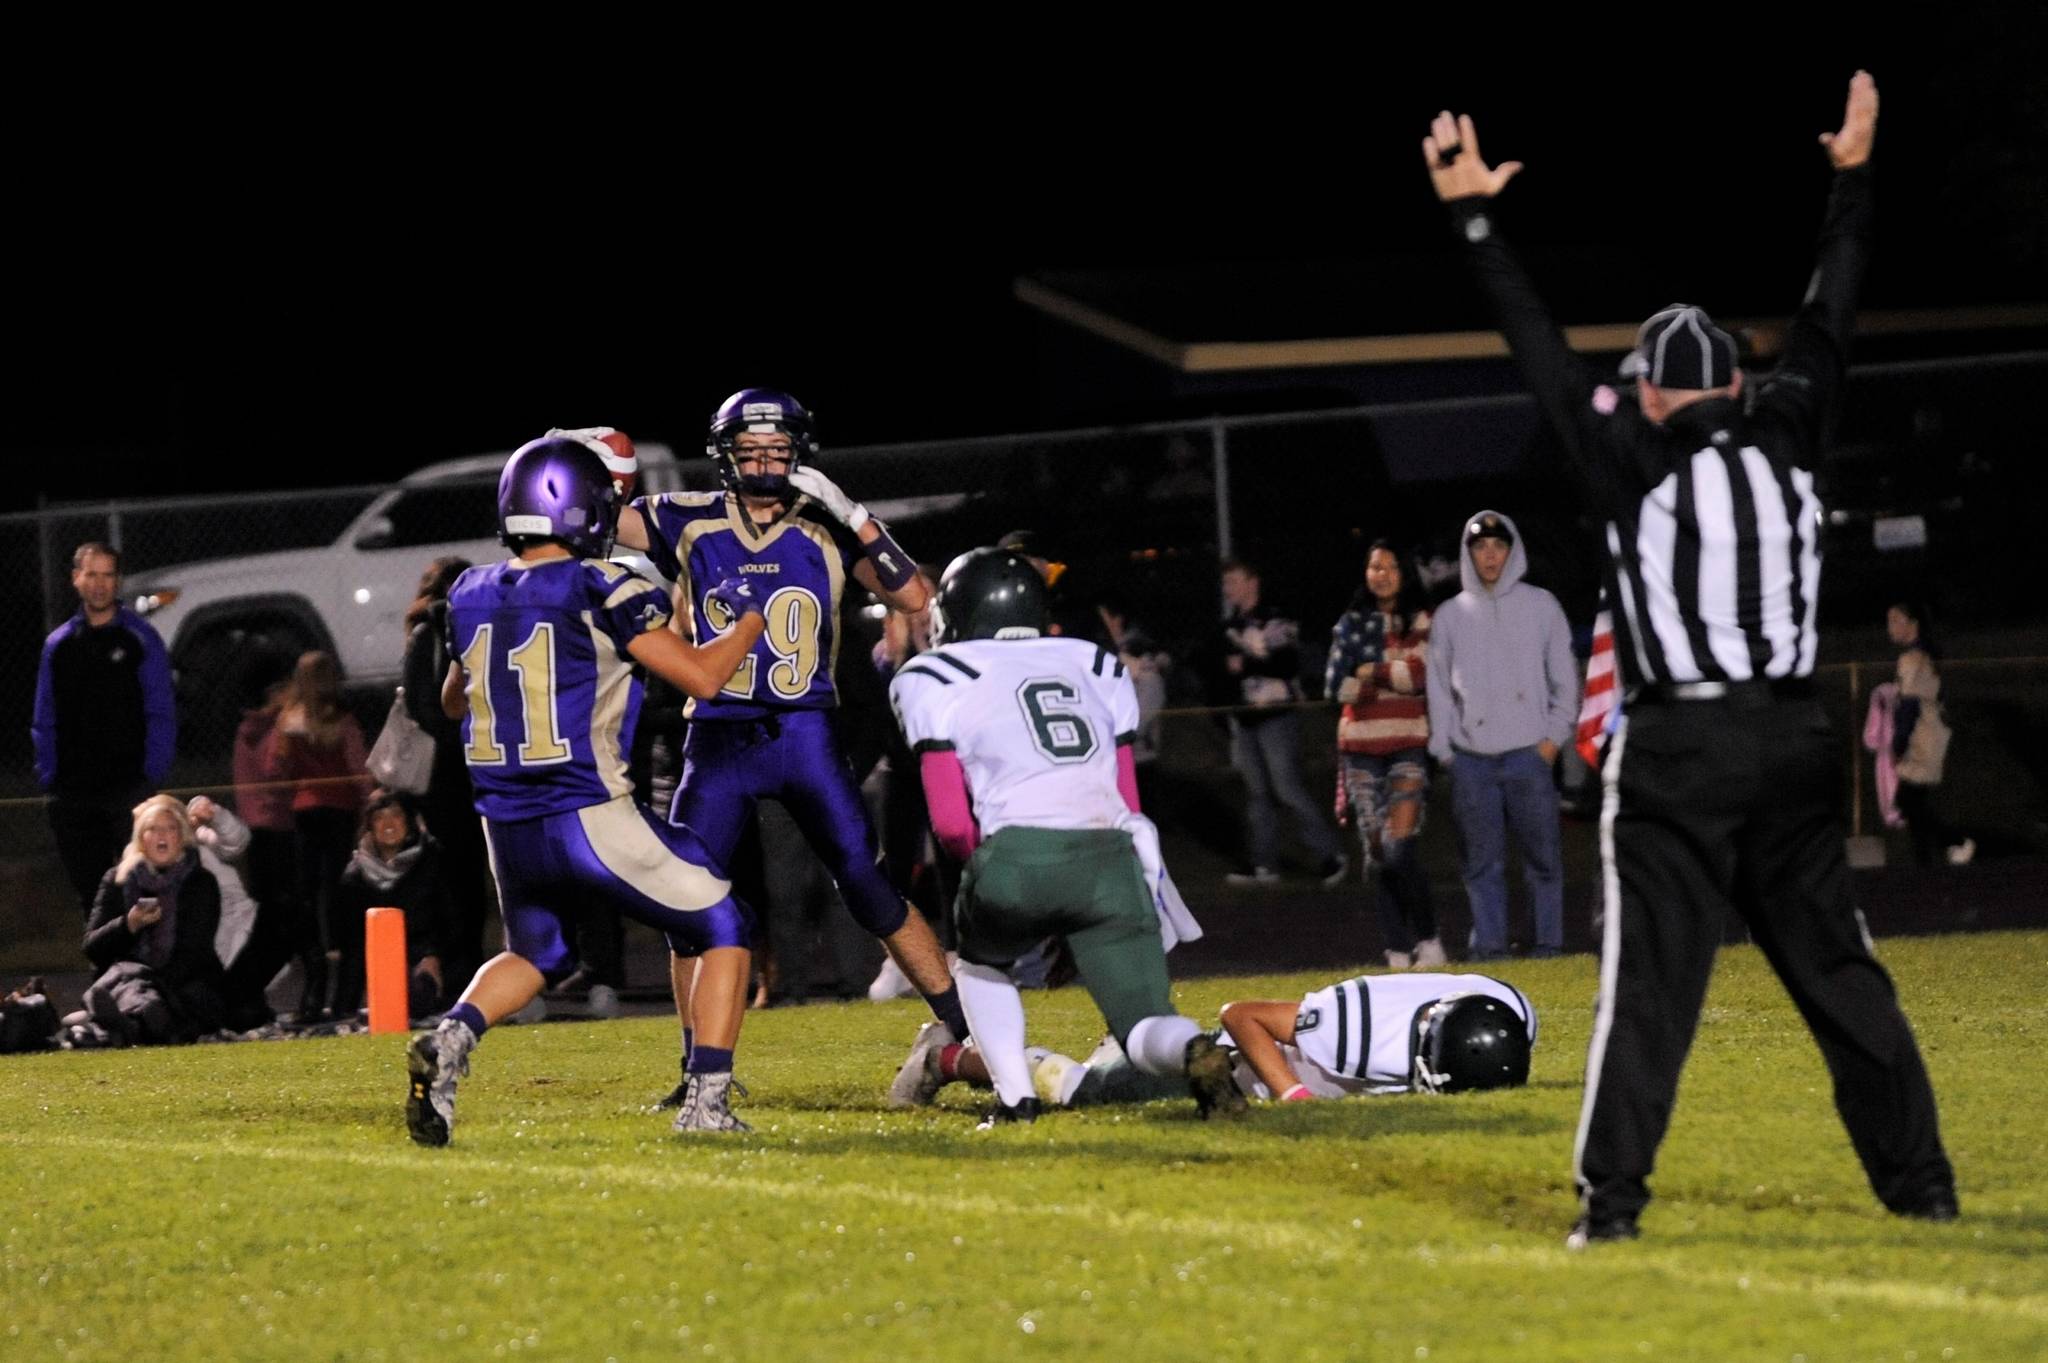 Sequim’s Michael Young (11) and Joey Oliver (29) celebrate a touchdown in the Wolves’ rivalry win over Port Angeles on Oct 12. Sequim Gazette photo by Matthew Nash